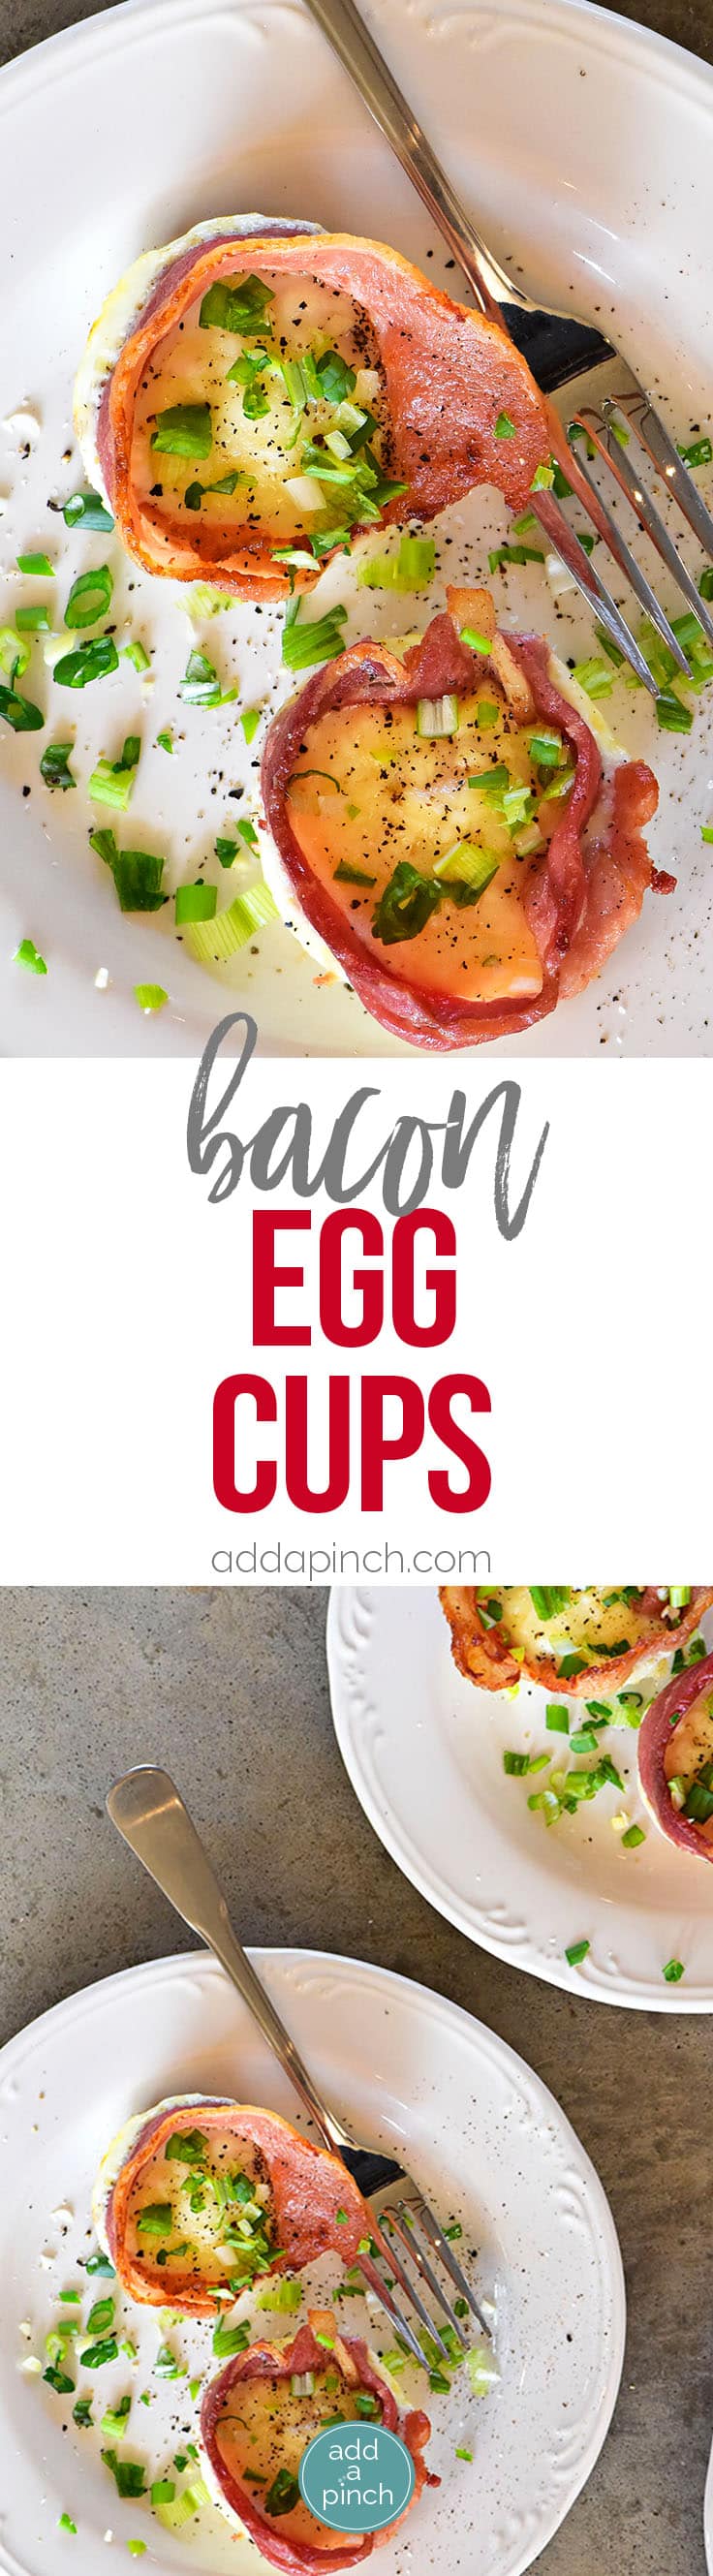 Bacon Egg Cups Recipe - Bacon Egg Cups make a delicious recipe perfect for serving for breakfast, brunch or snack! Great to make for a crowd or to make ahead and reheat for busy mornings! // addapinch.com